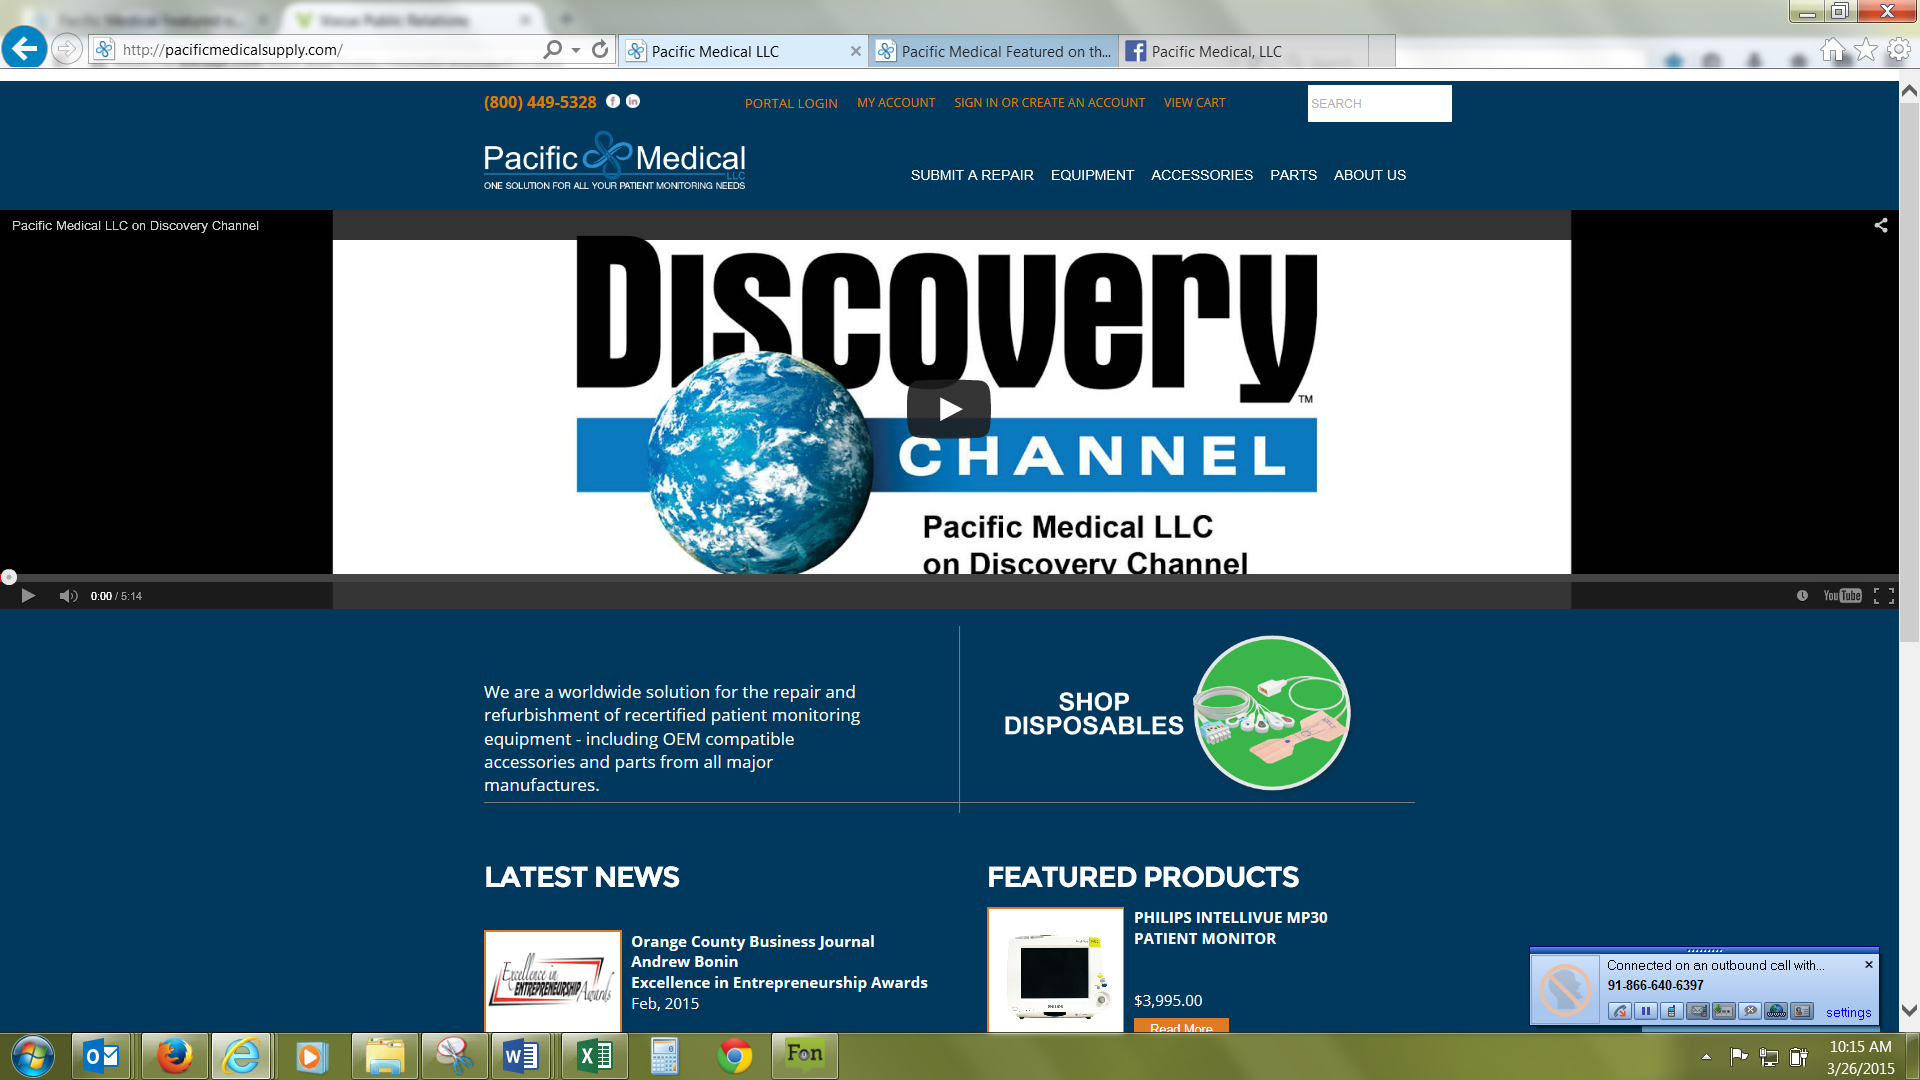 Pacific Medical Featured on the Discovery Channel